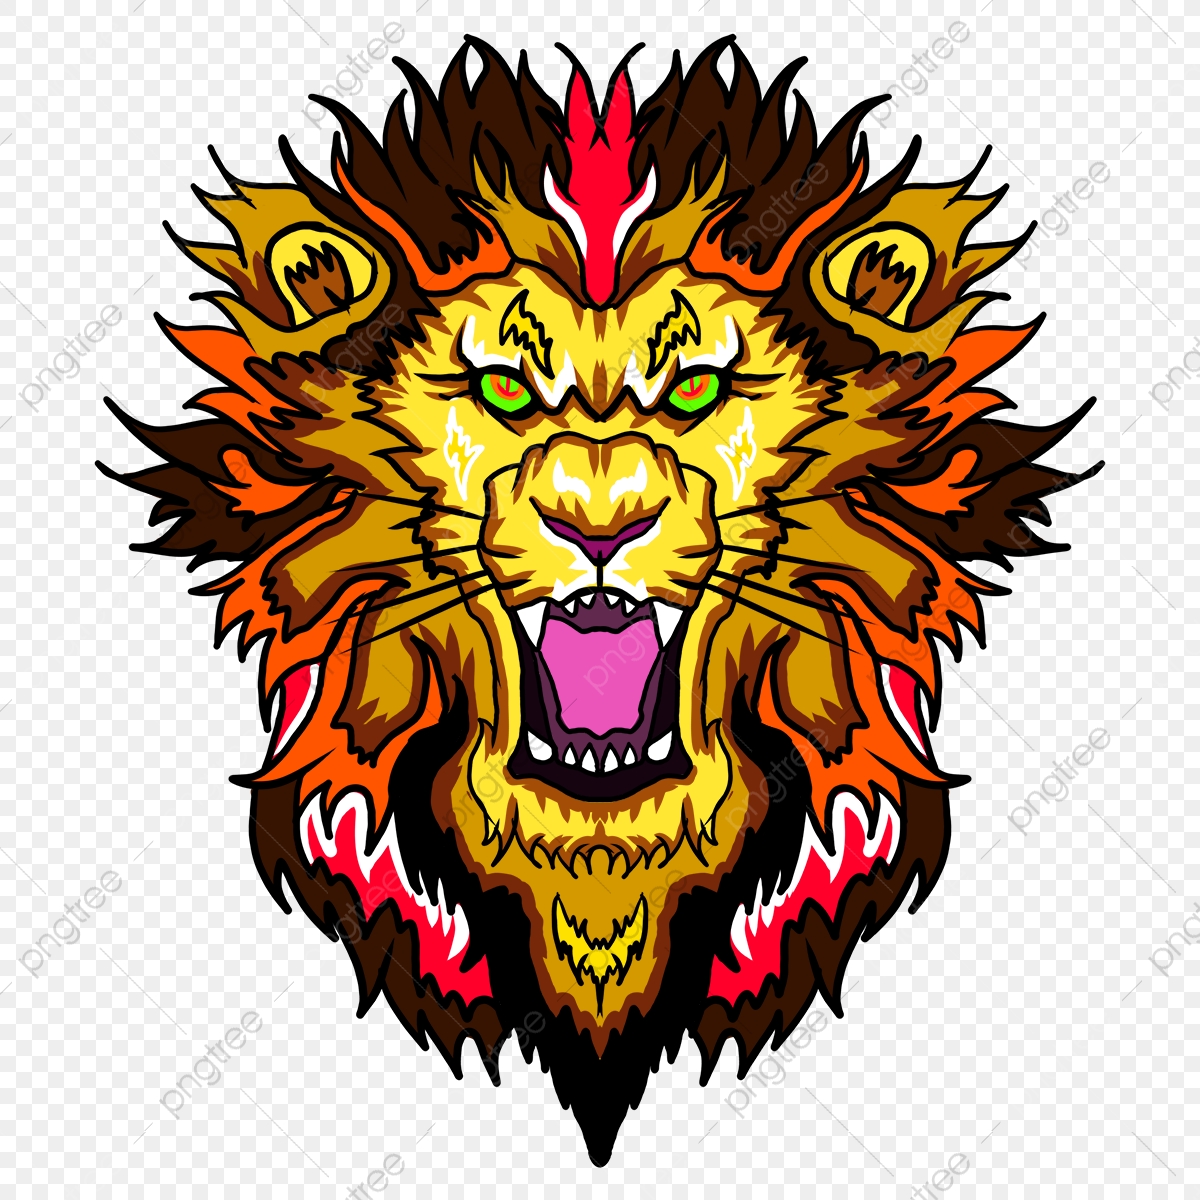 pngtree-frontal-lion-head-with-fire-pattern-mane-clip-art-png-image_5978830